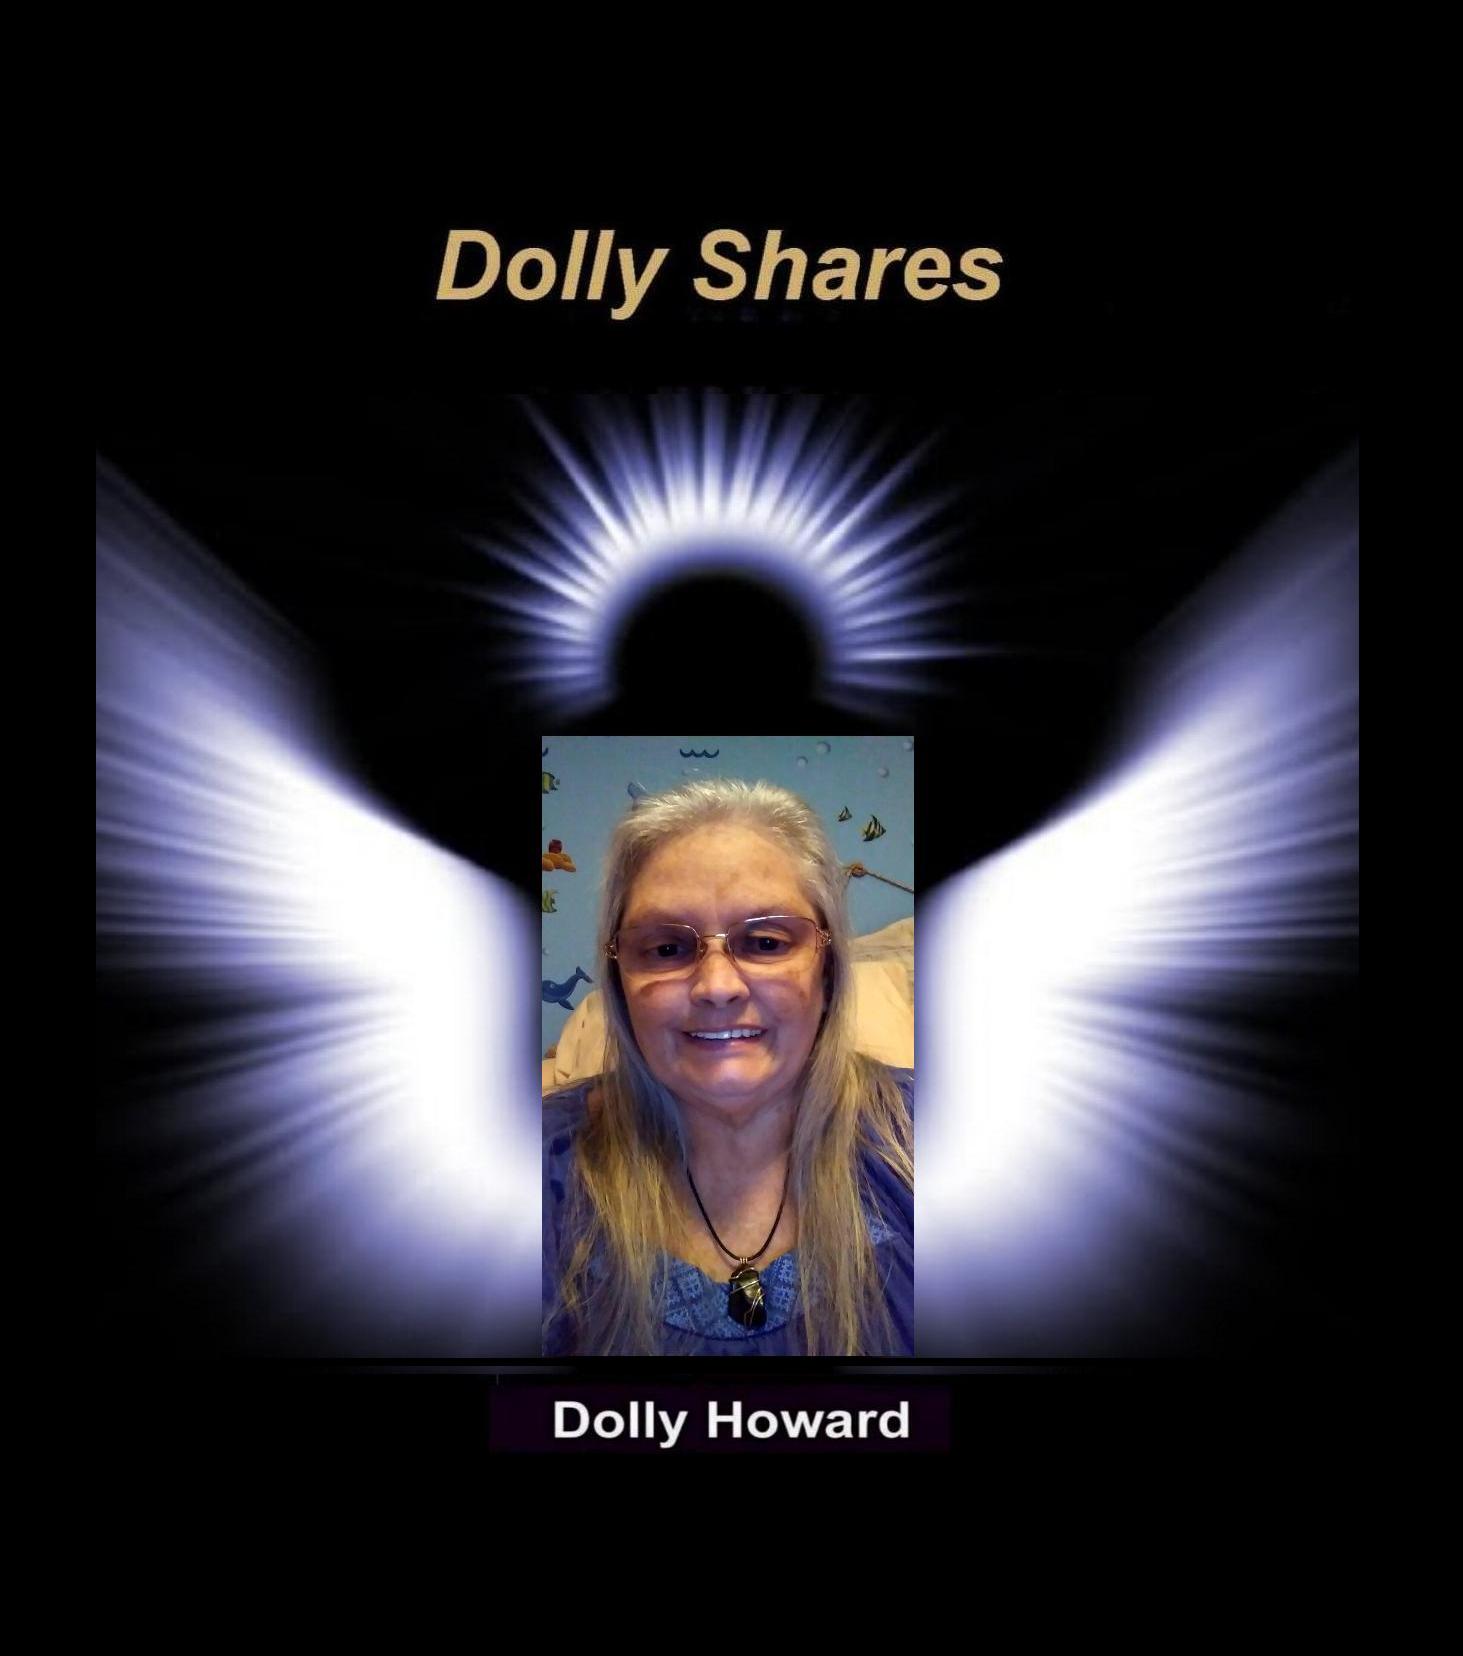 DOLLY SHARES - Dolly Howard with Dave & Angels from 7/1/22